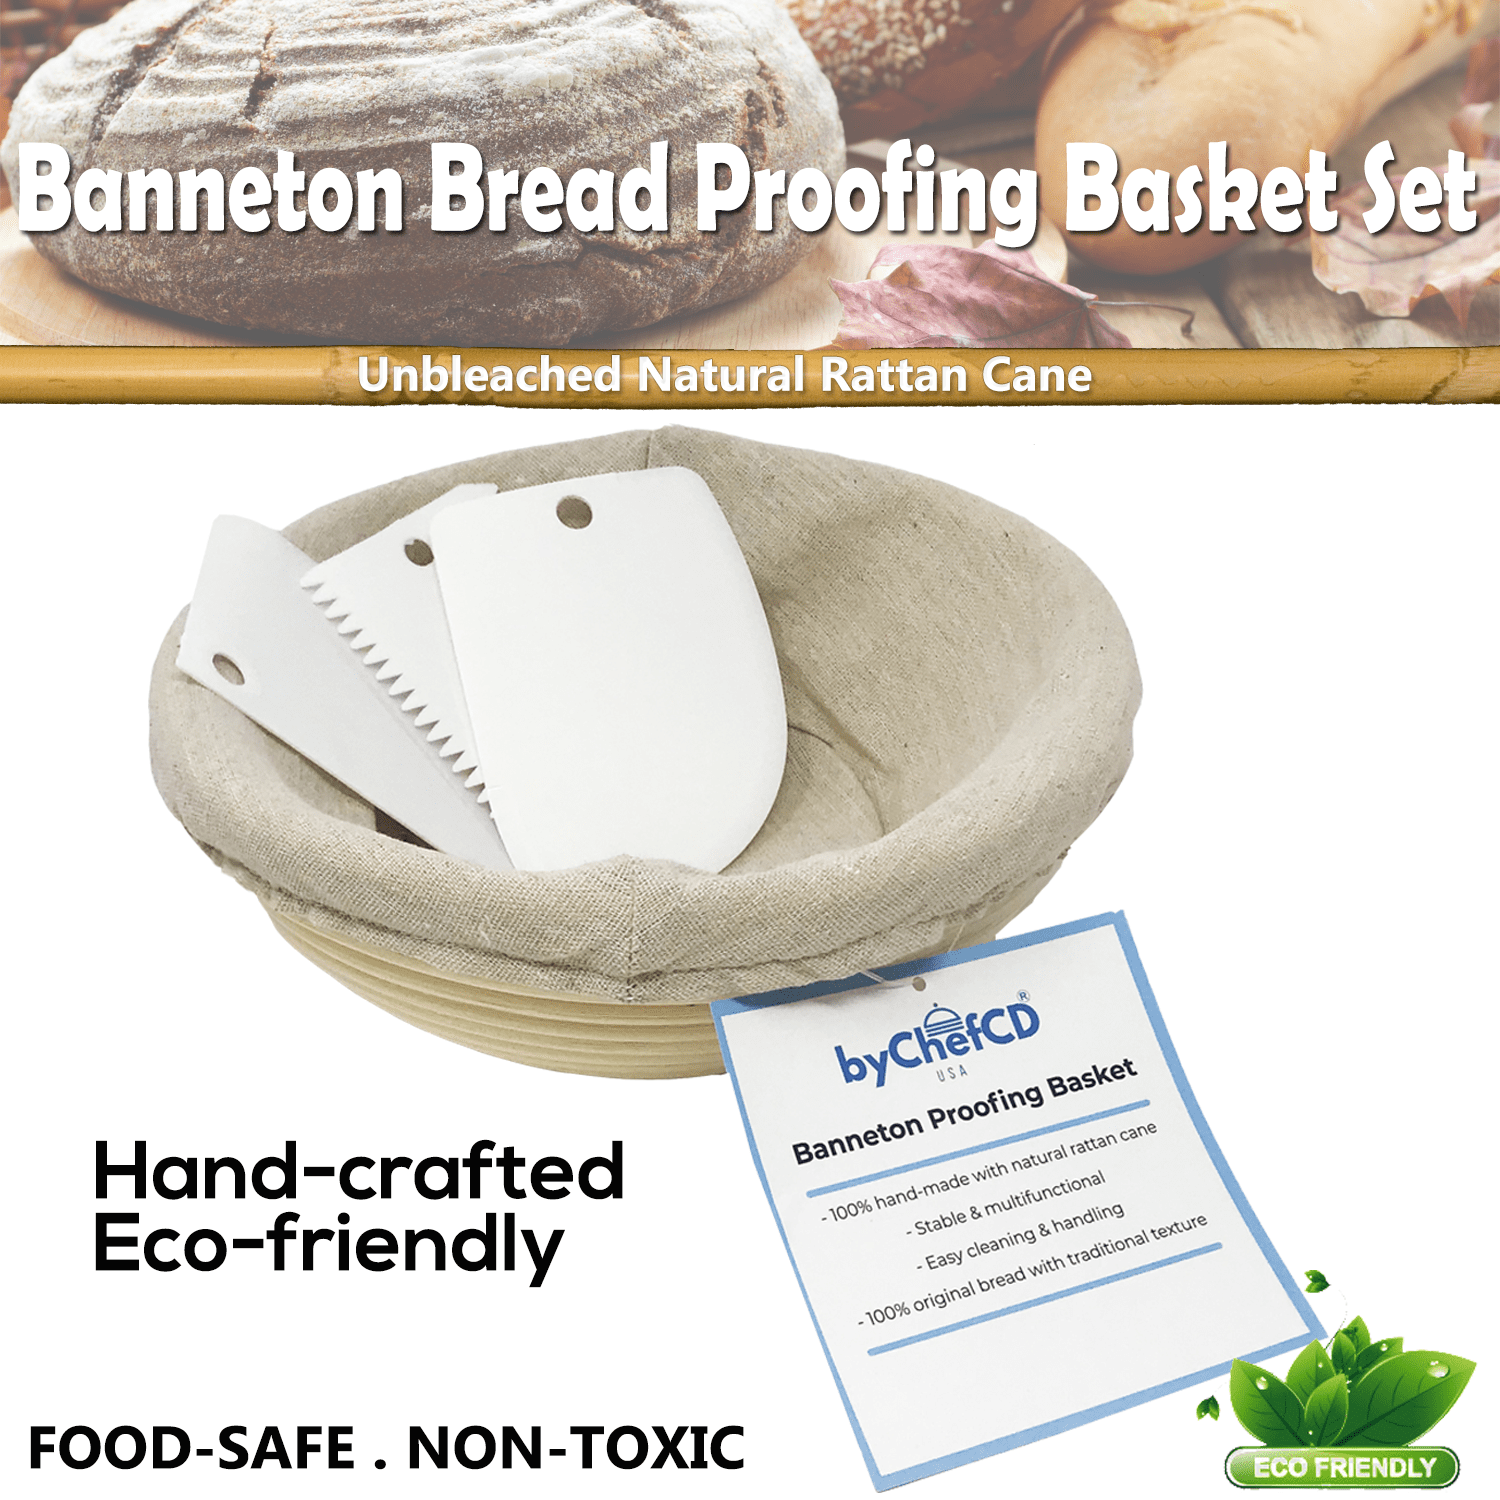 Round Banneton Proofing Basket Set Brotform Handmade Unbleached Natural Cane Bread Baking Kit with Cloth Liner 10 inch 